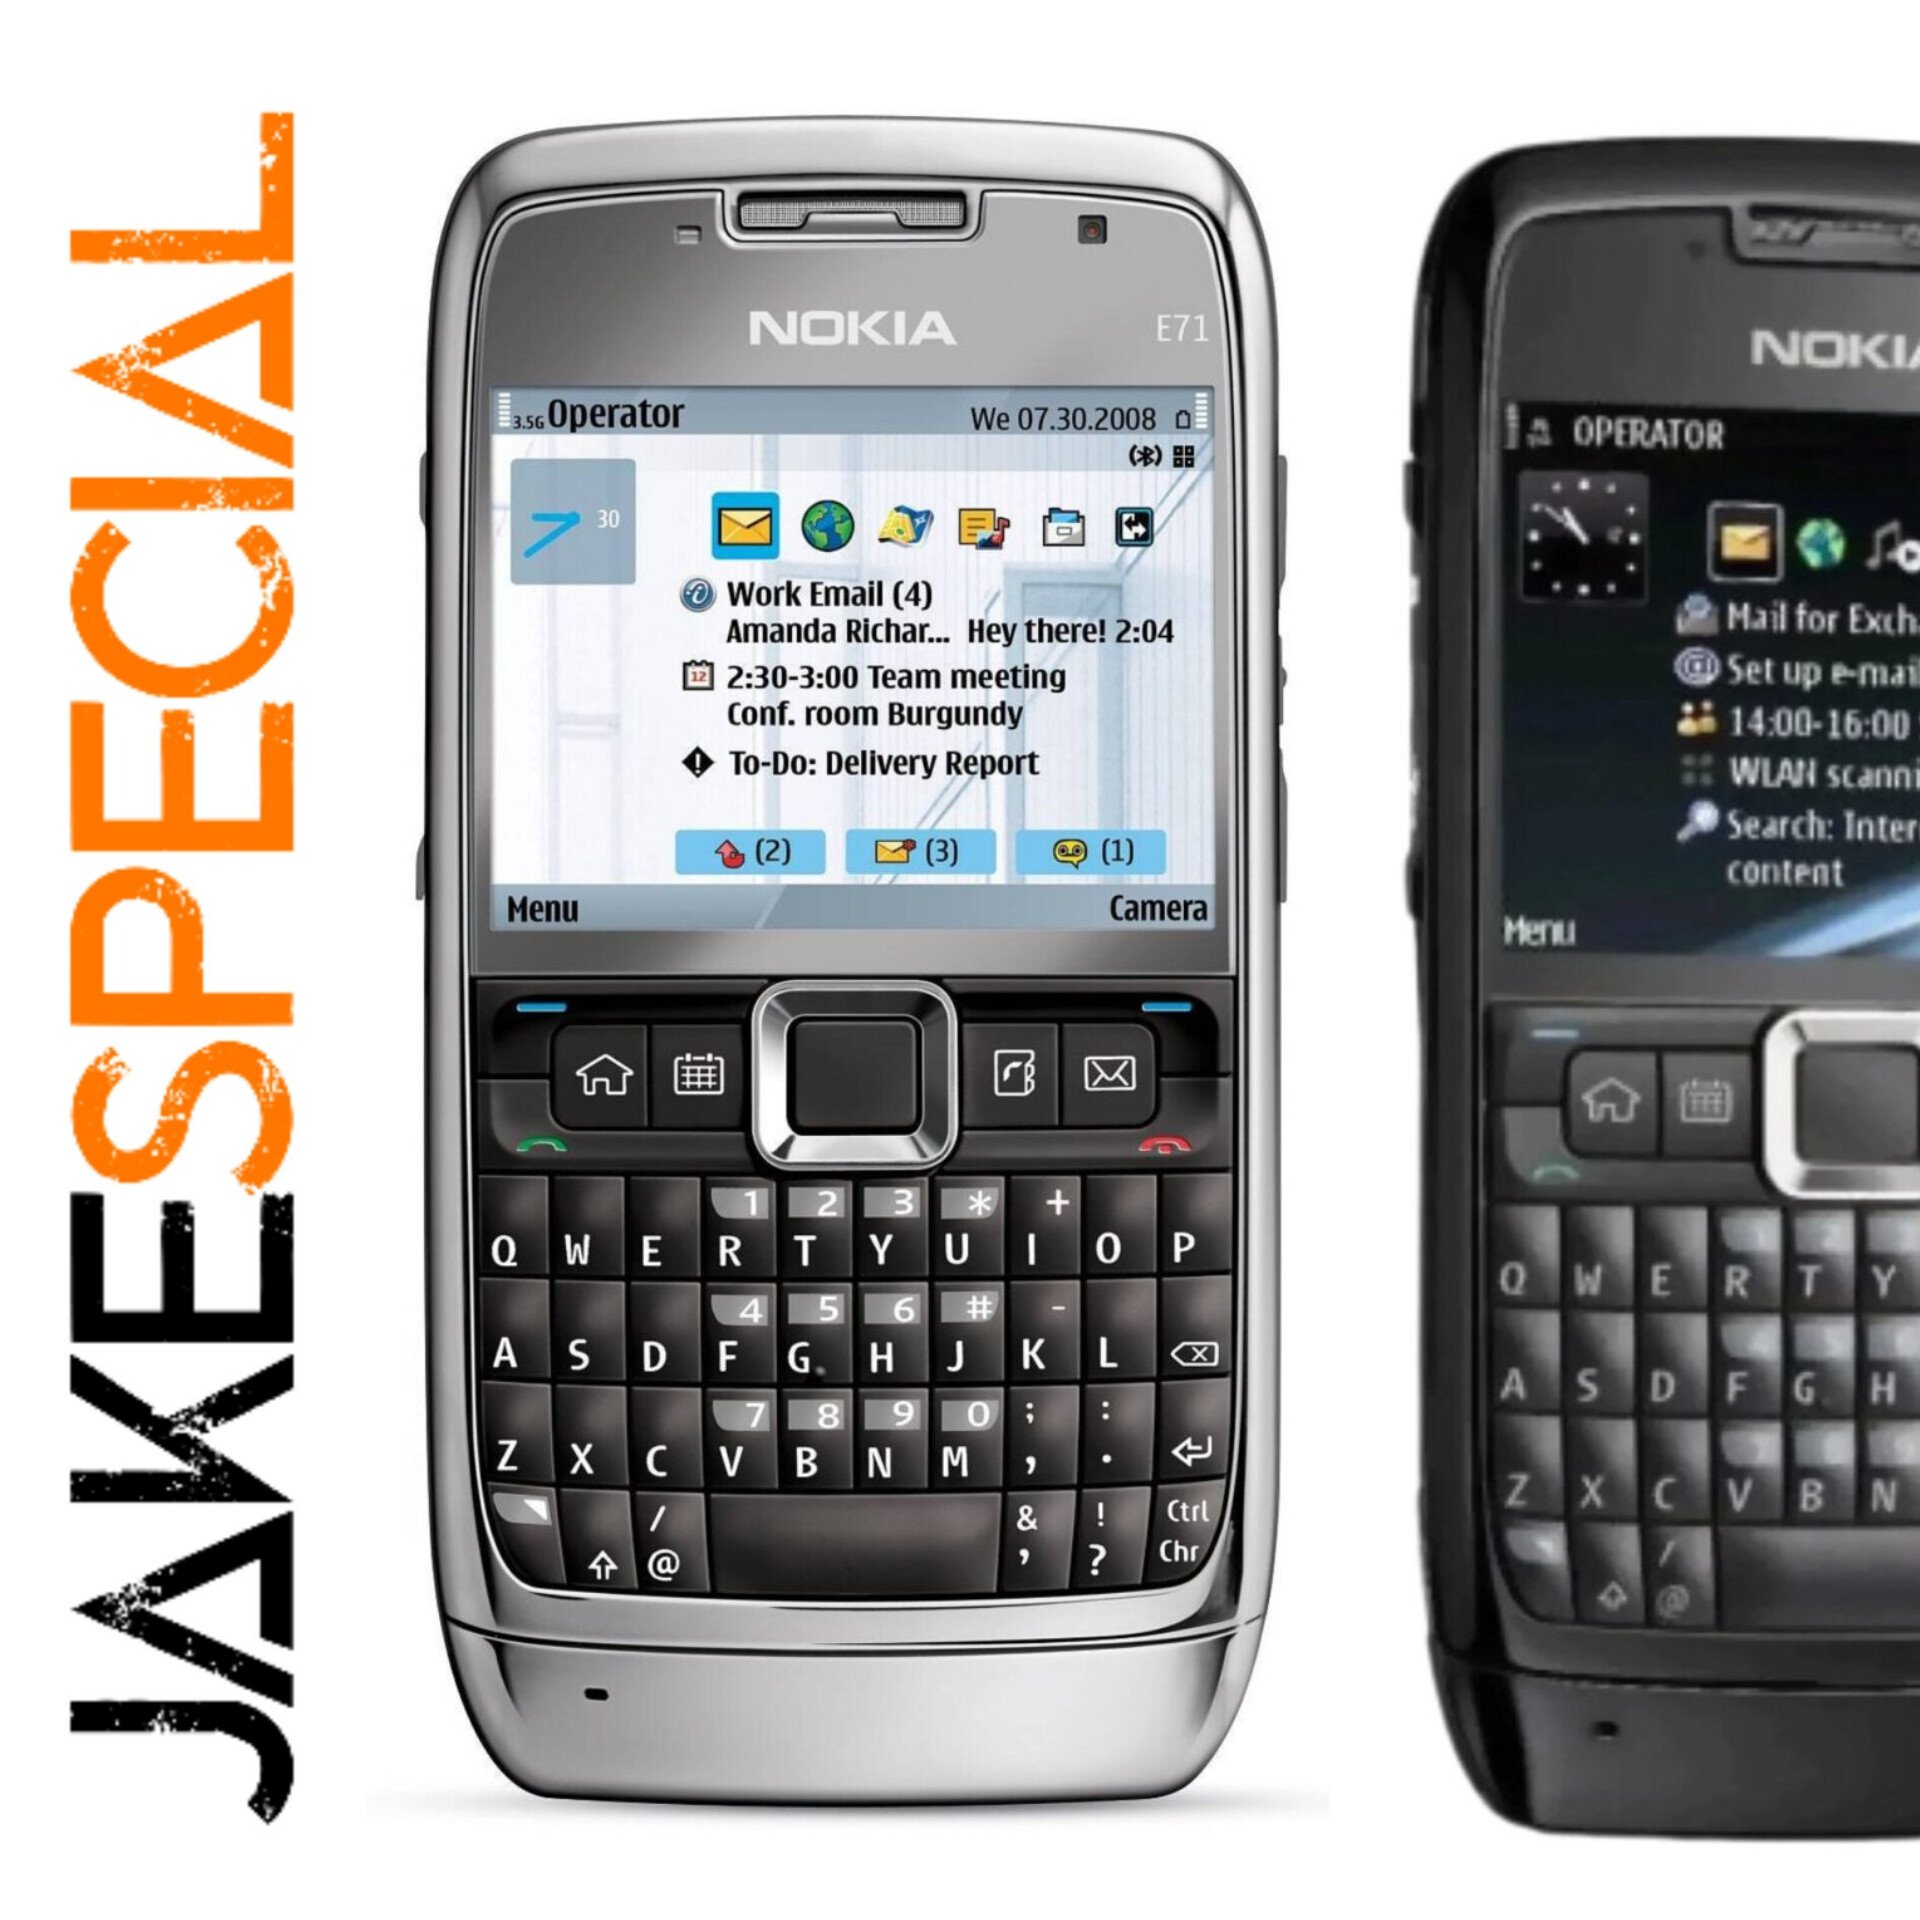 Nokia E71 Mobile Phone: 3G, 3.2MP, QWERTY, Unlocked and Fully Operational